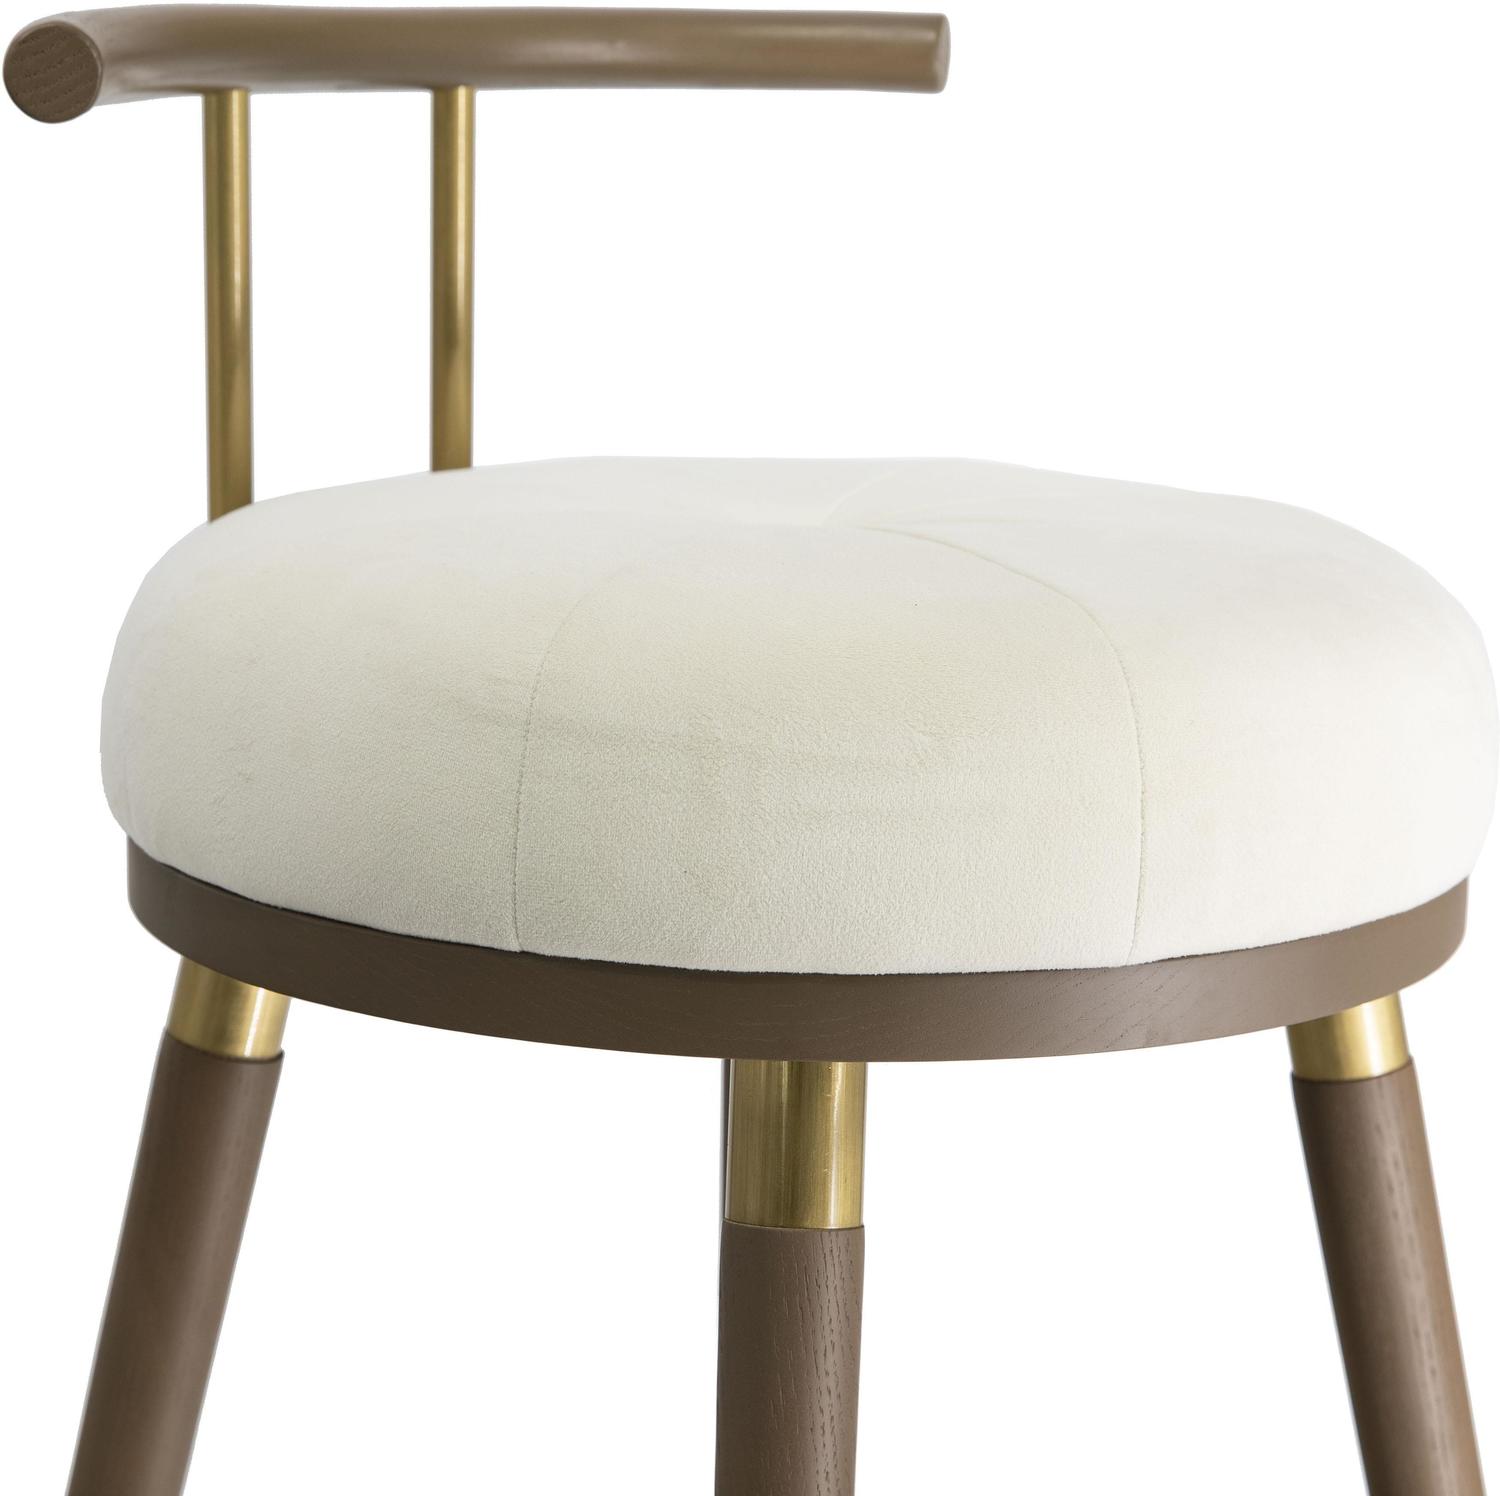 bar stool covers with backs Tov Furniture Stools Cream